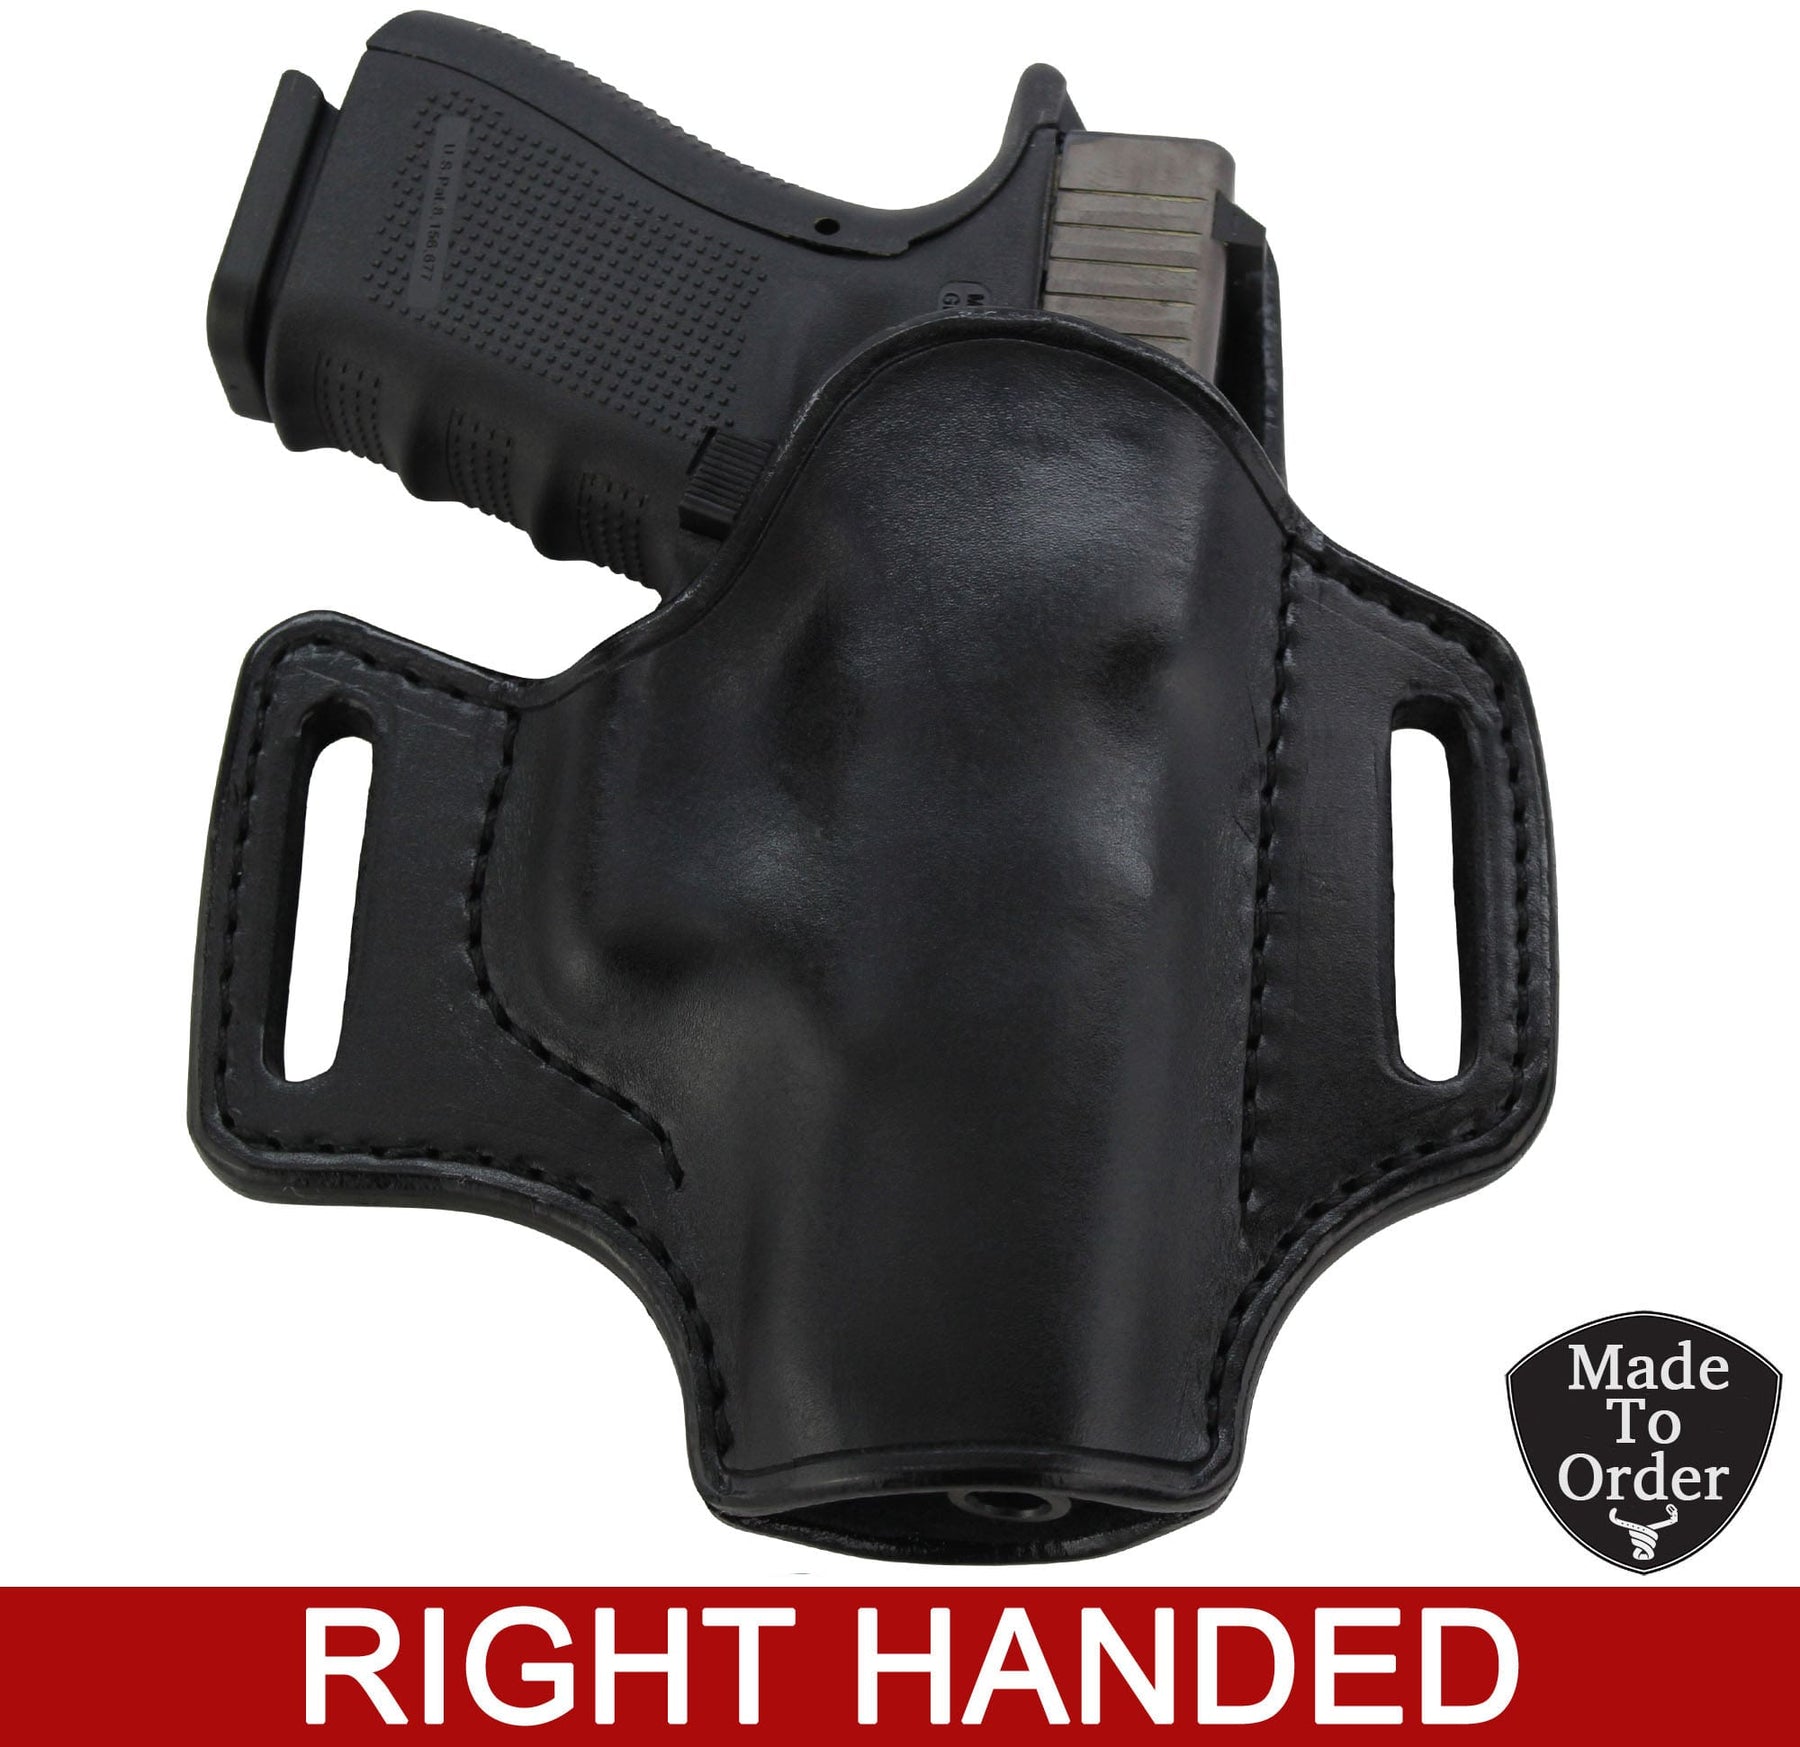 Black .45 Caliber Smooth Leather Holster - Western Express